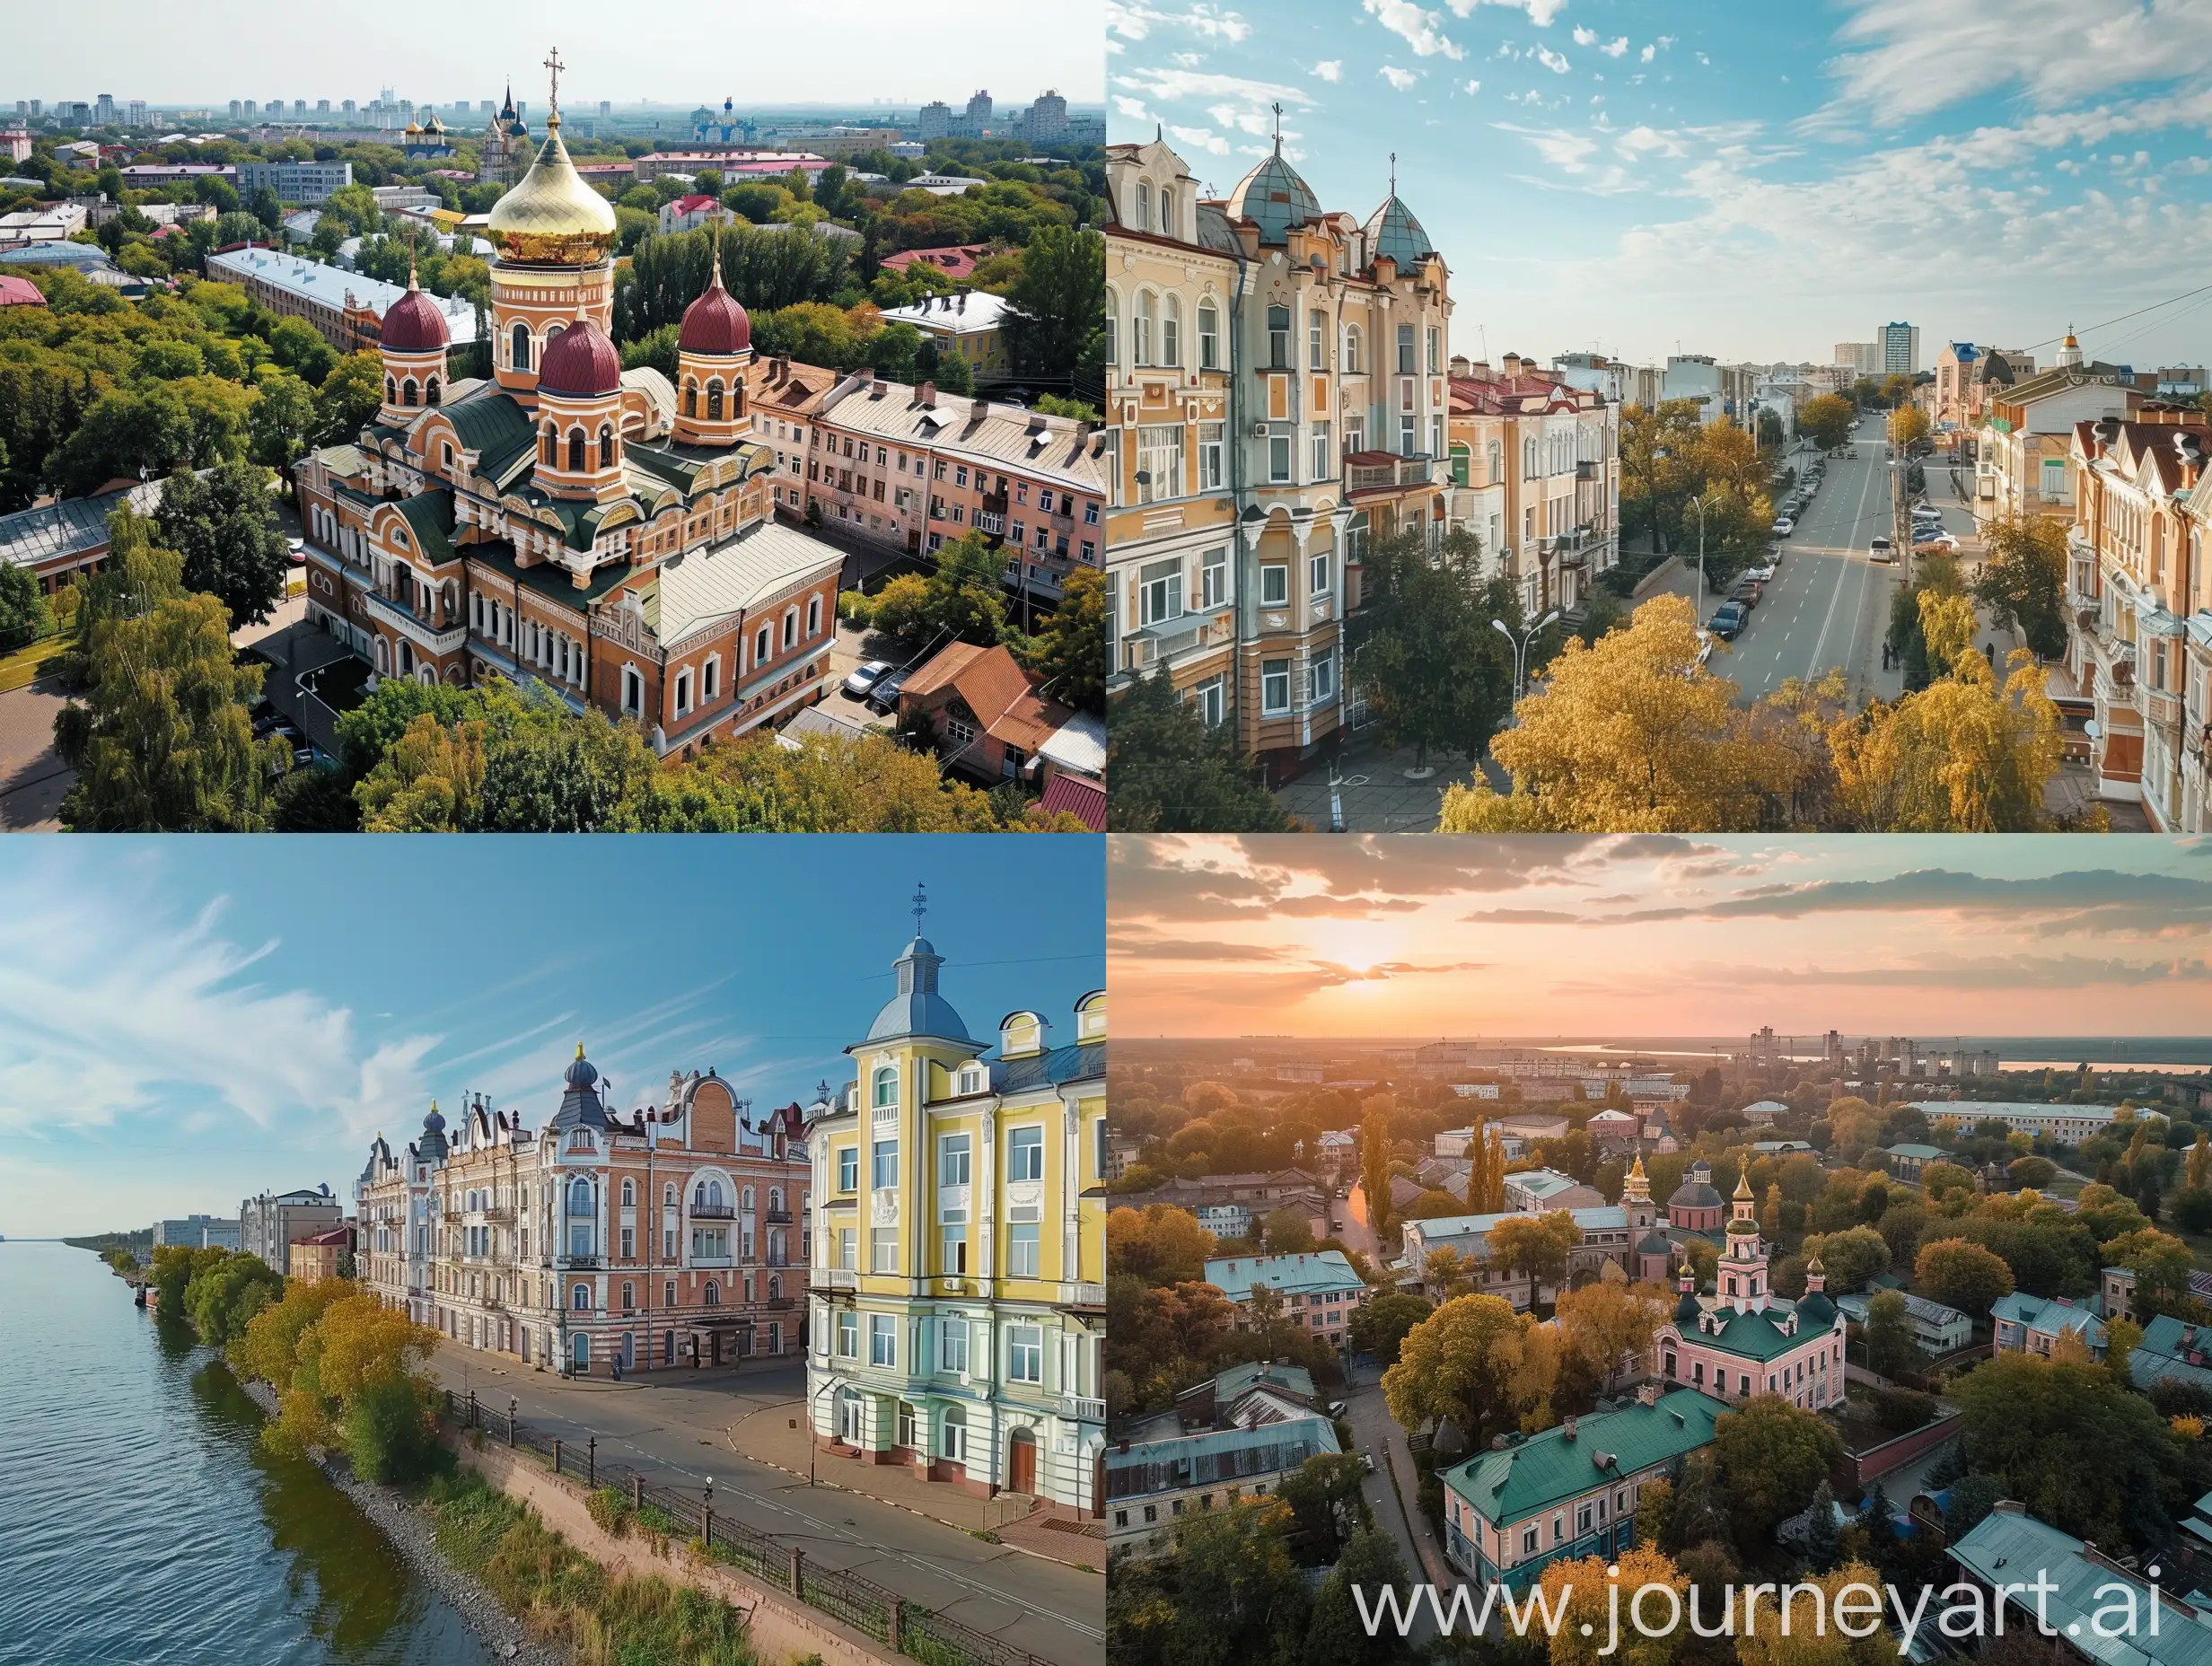 the image that shows the most common attractive of the Taganrog city